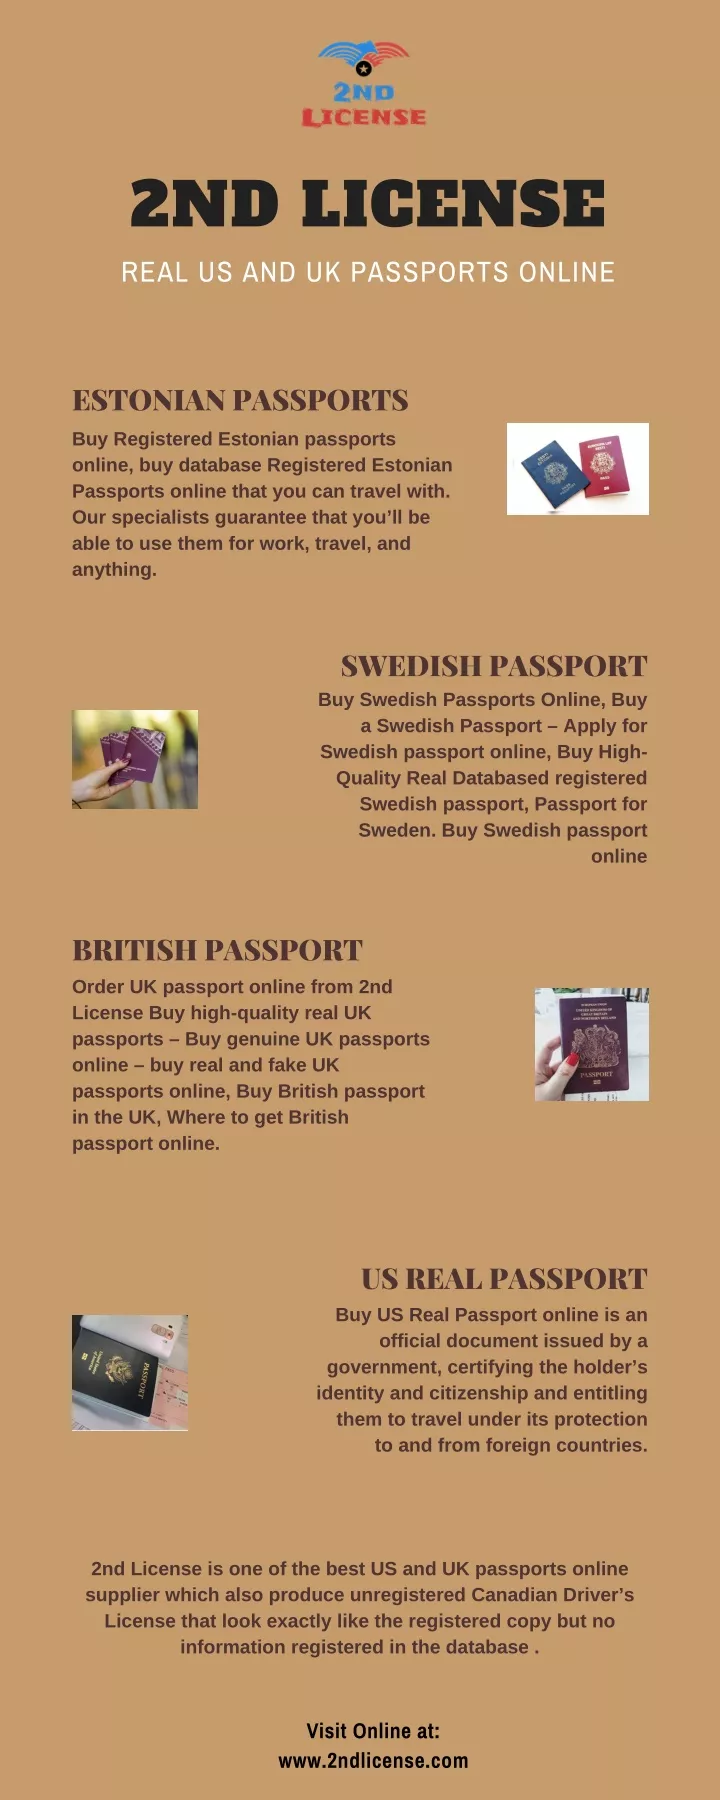 2nd license real us and uk passports online